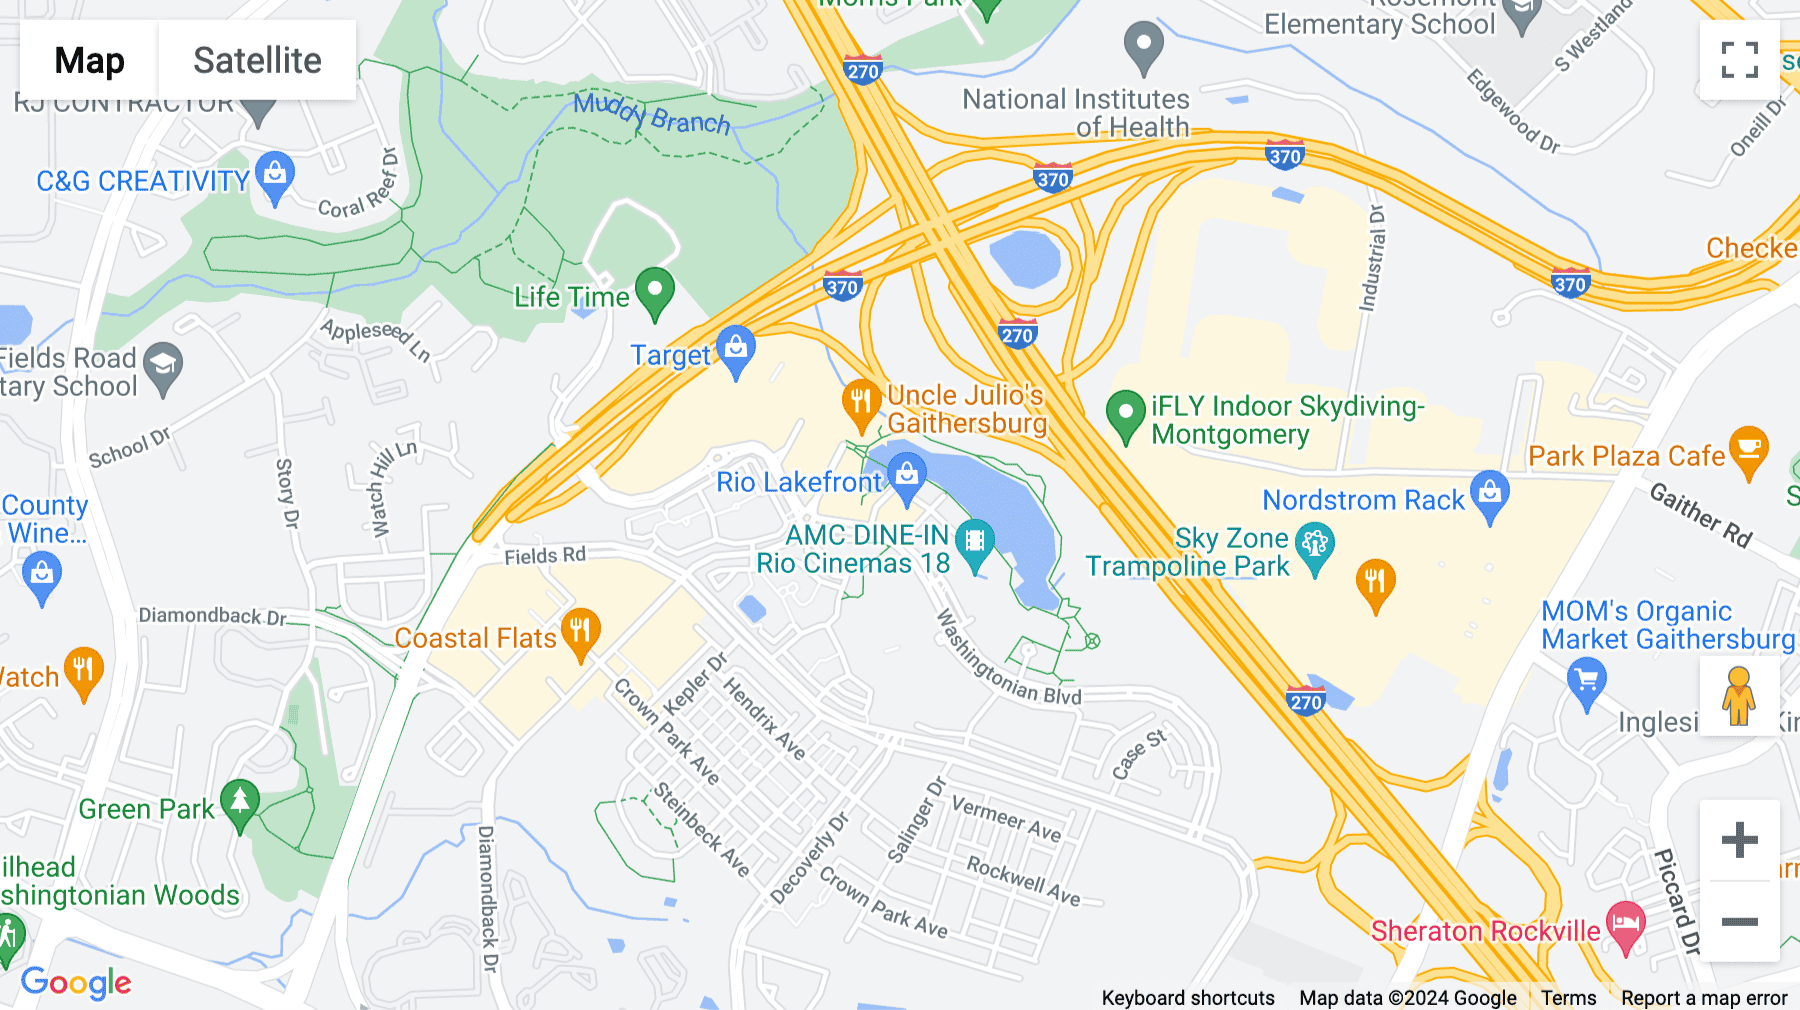 Click for interative map of 9841 Washingtonian Blvd, Suite 200, Gaithersburg